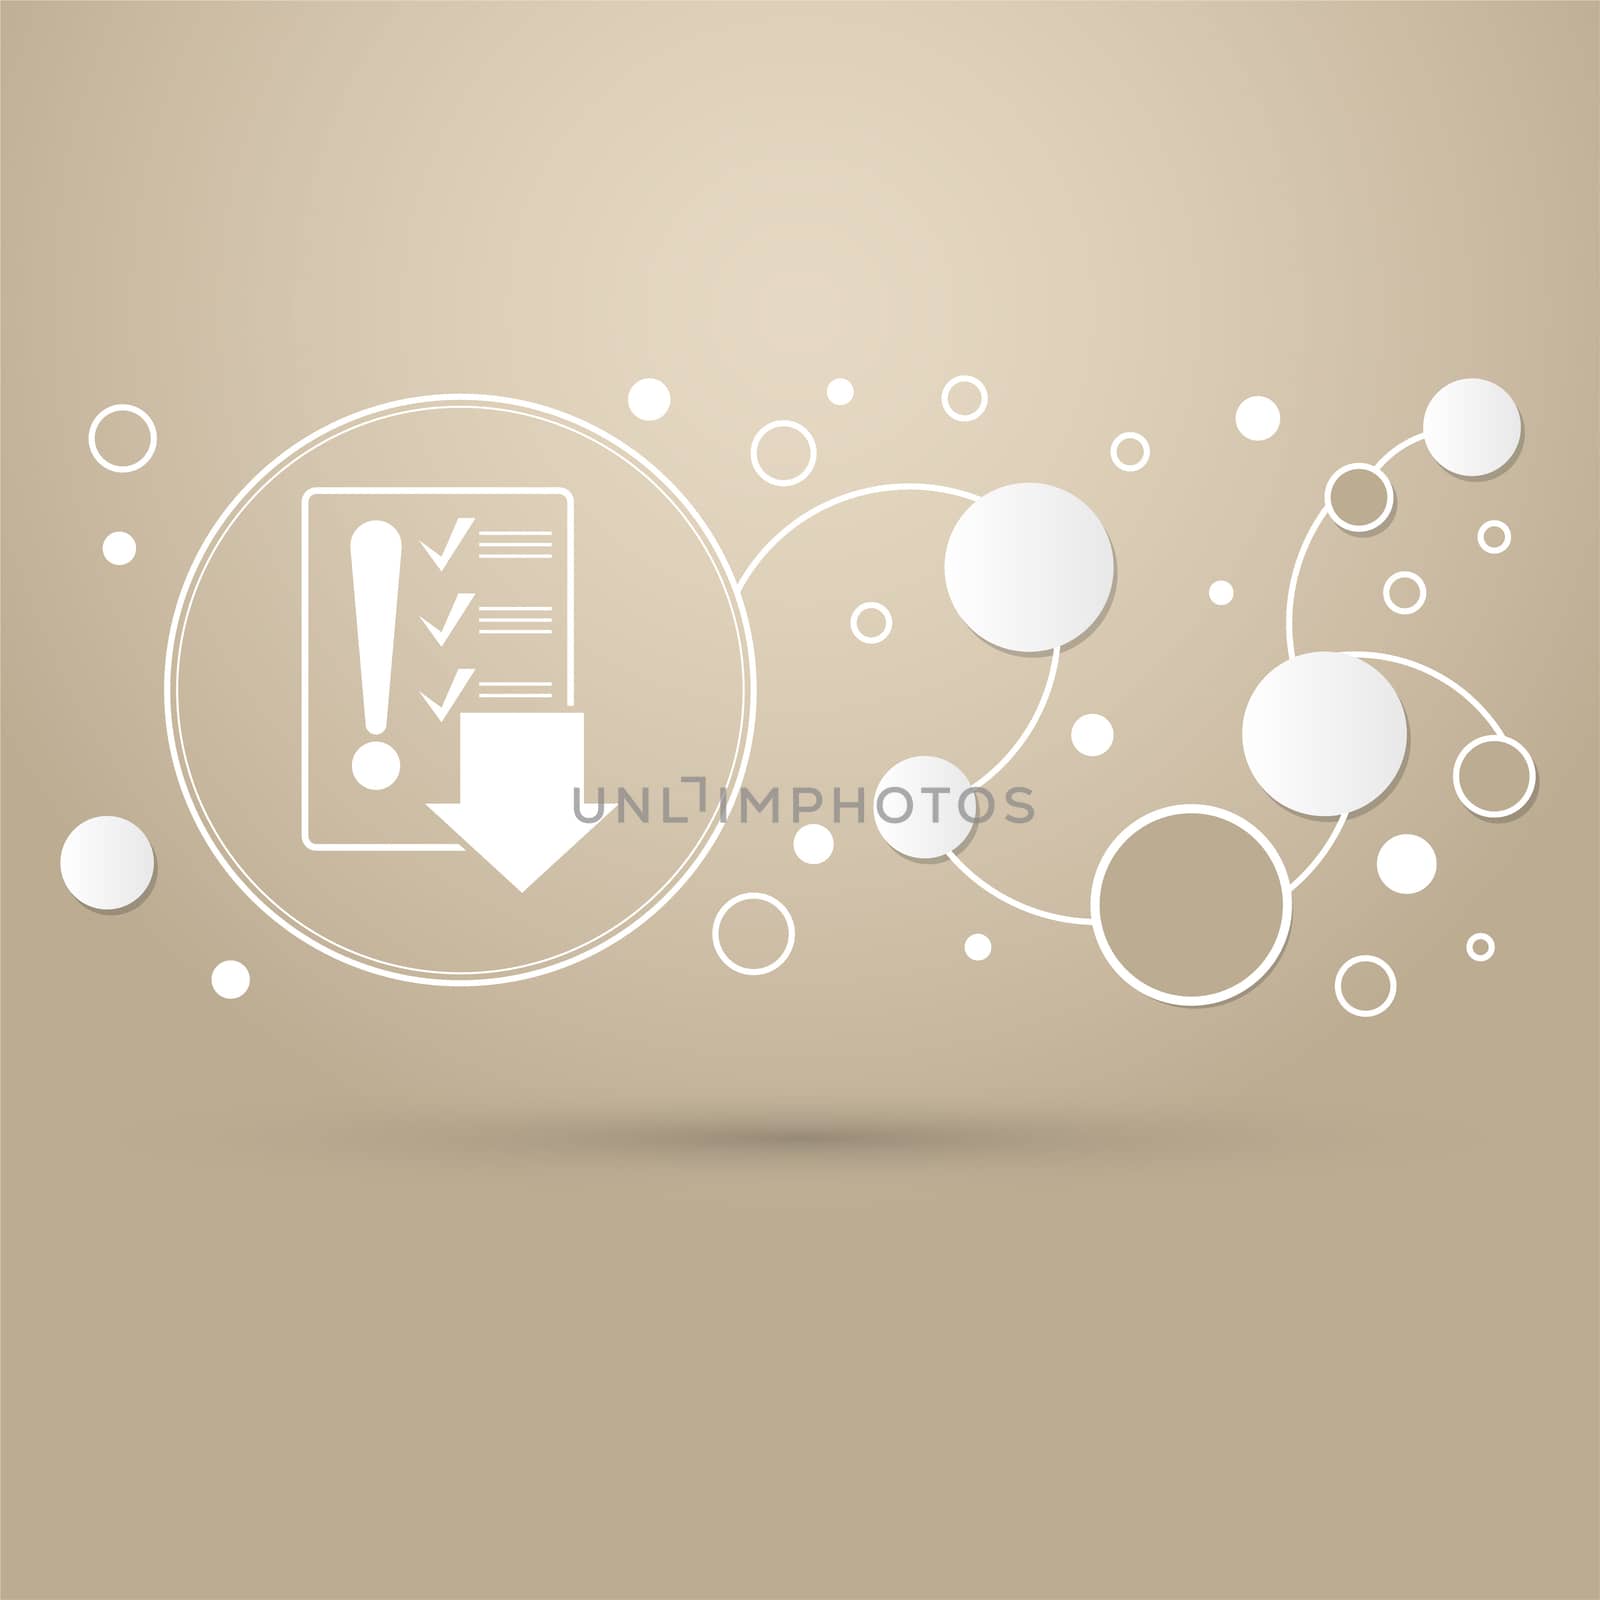 Pictograph of checklist icon on a brown background with elegant style and modern design infographic.  by Adamchuk